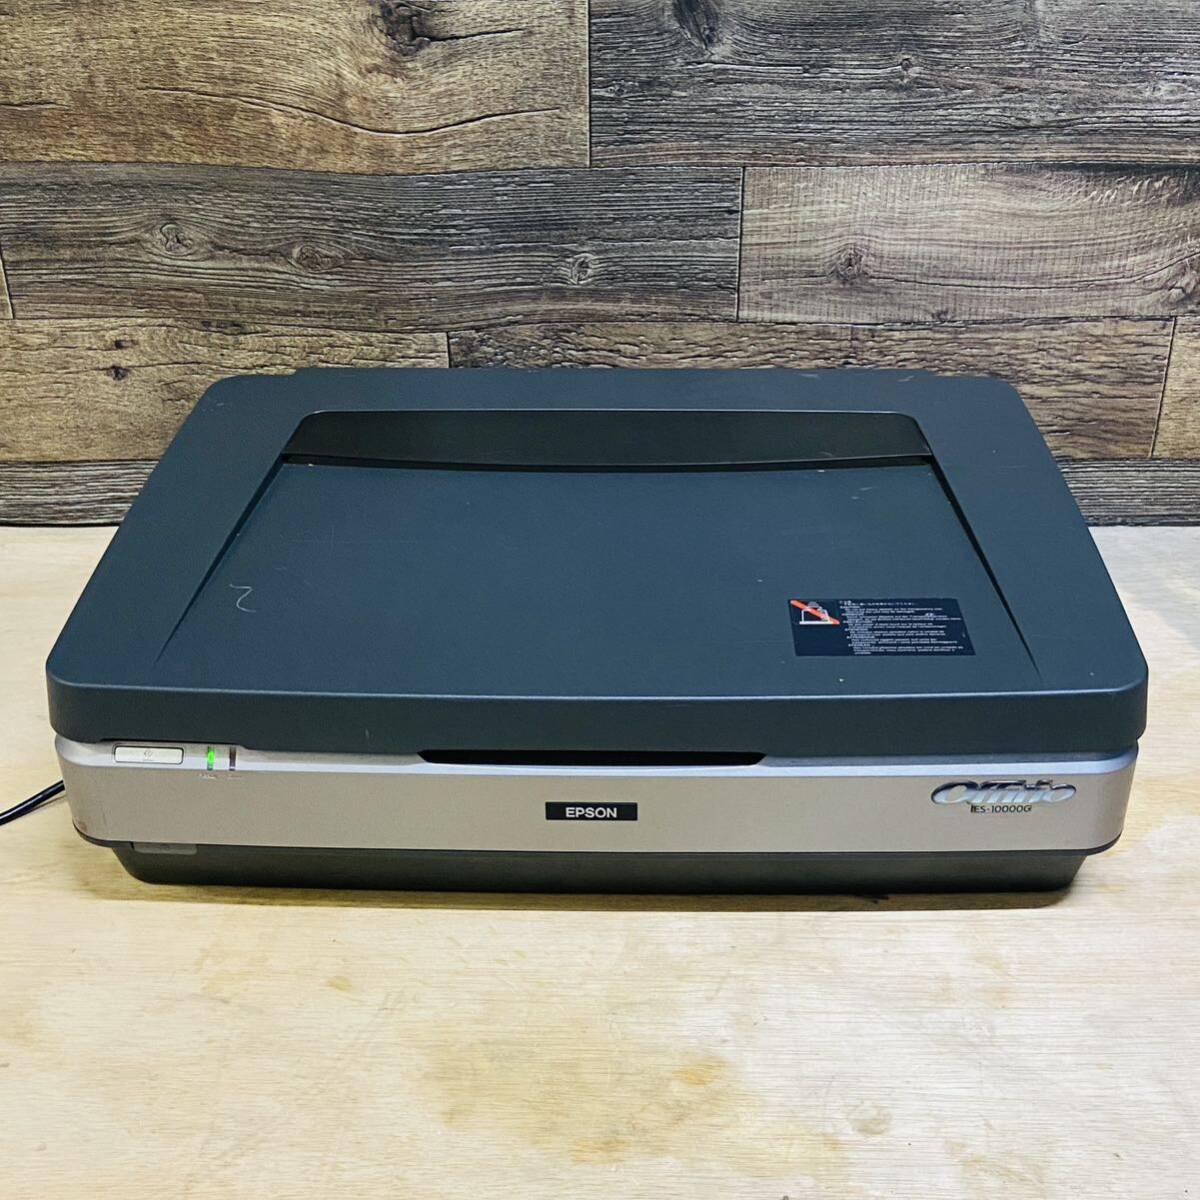 EPSON/ Epson A3 correspondence Flat bed color scanner *ES-10000G/ penetration manuscript unit attaching /LAN correspondence power supply has confirmed 